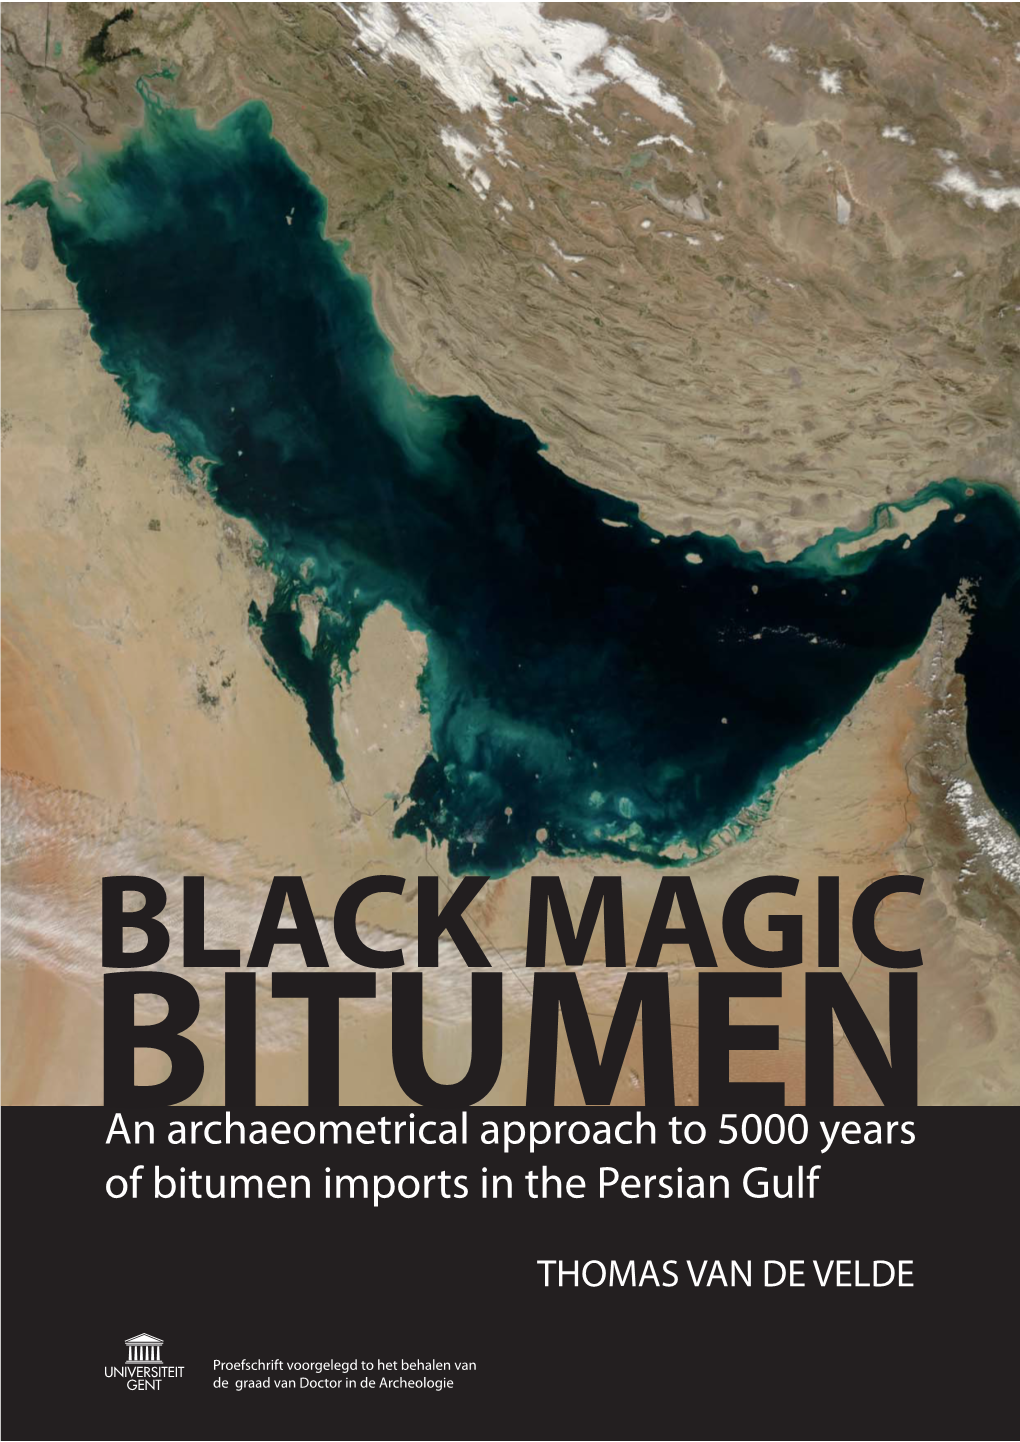 An Archaeometrical Approach to 5000 Years of Bitumen Imports in the Persian Gulf